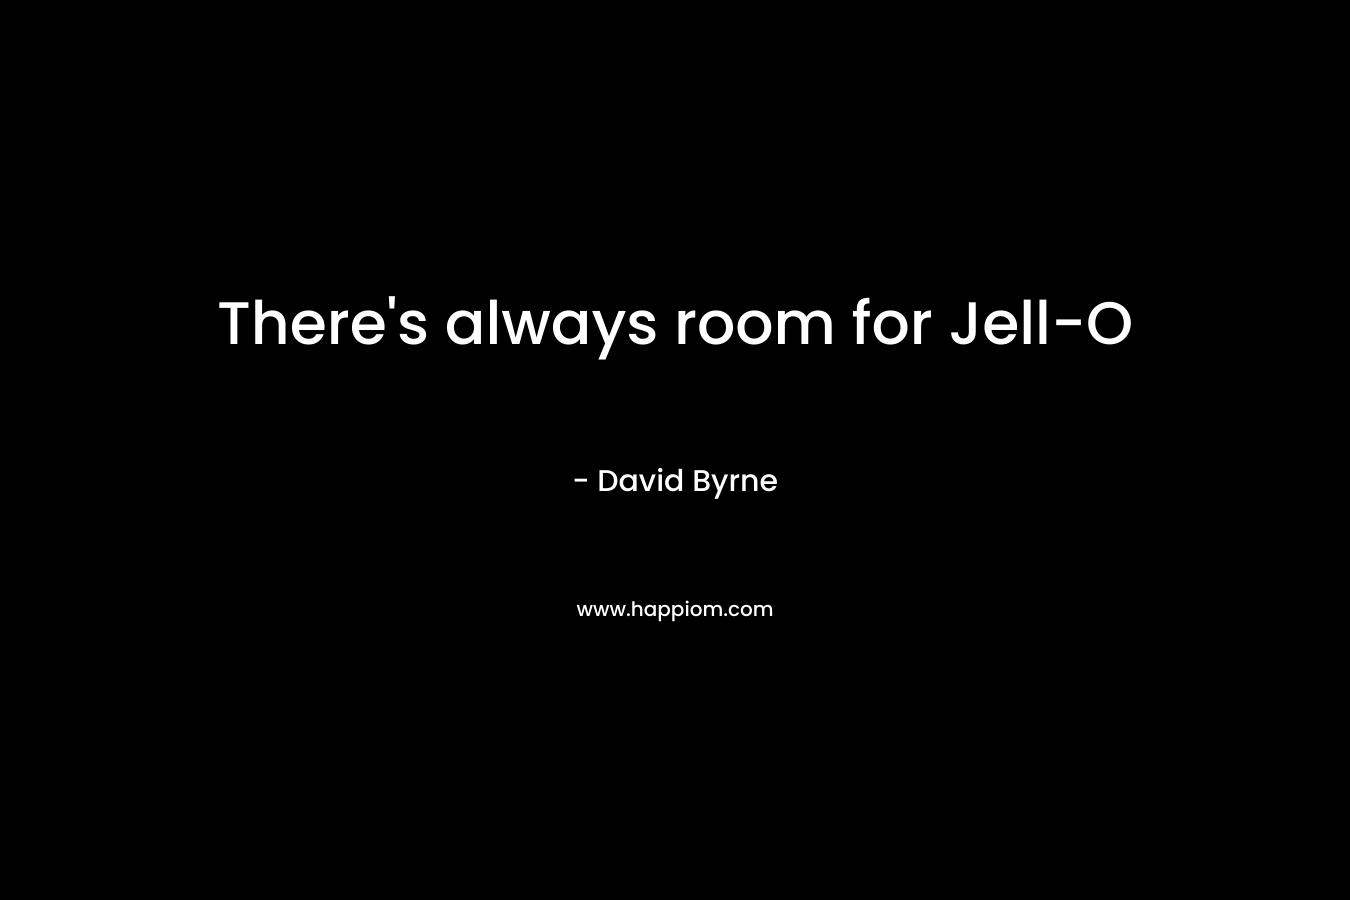 There’s always room for Jell-O – David Byrne